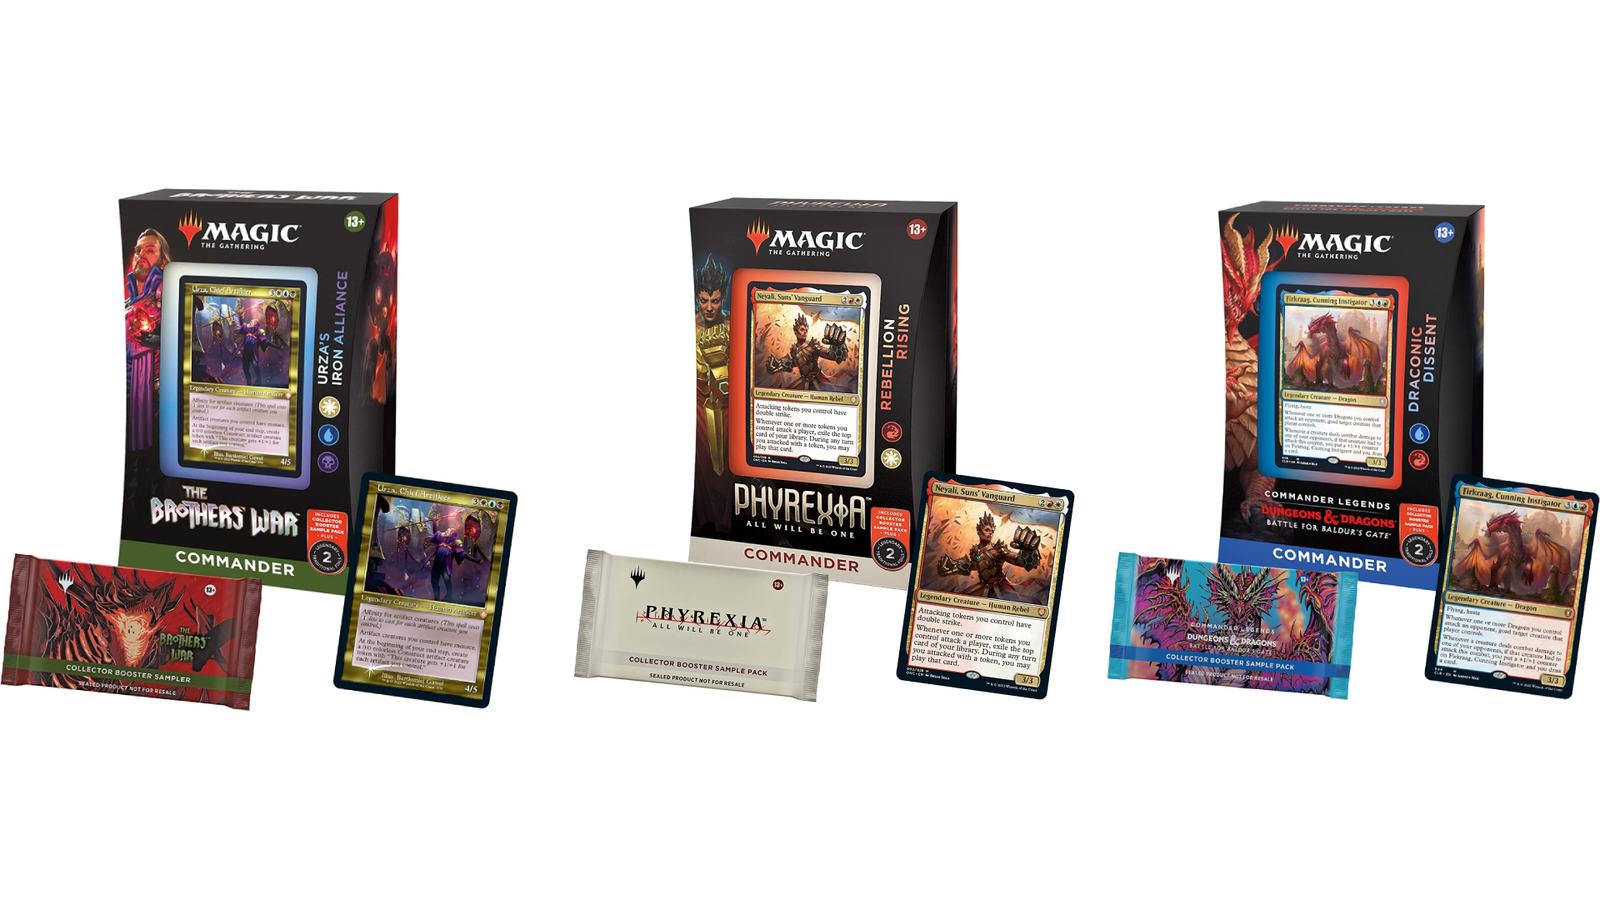 https://assetsio.reedpopcdn.com/magic-the-gathering-best-value-commander-precons-(1).jpg?width=1600&height=900&fit=crop&quality=100&format=png&enable=upscale&auto=webp